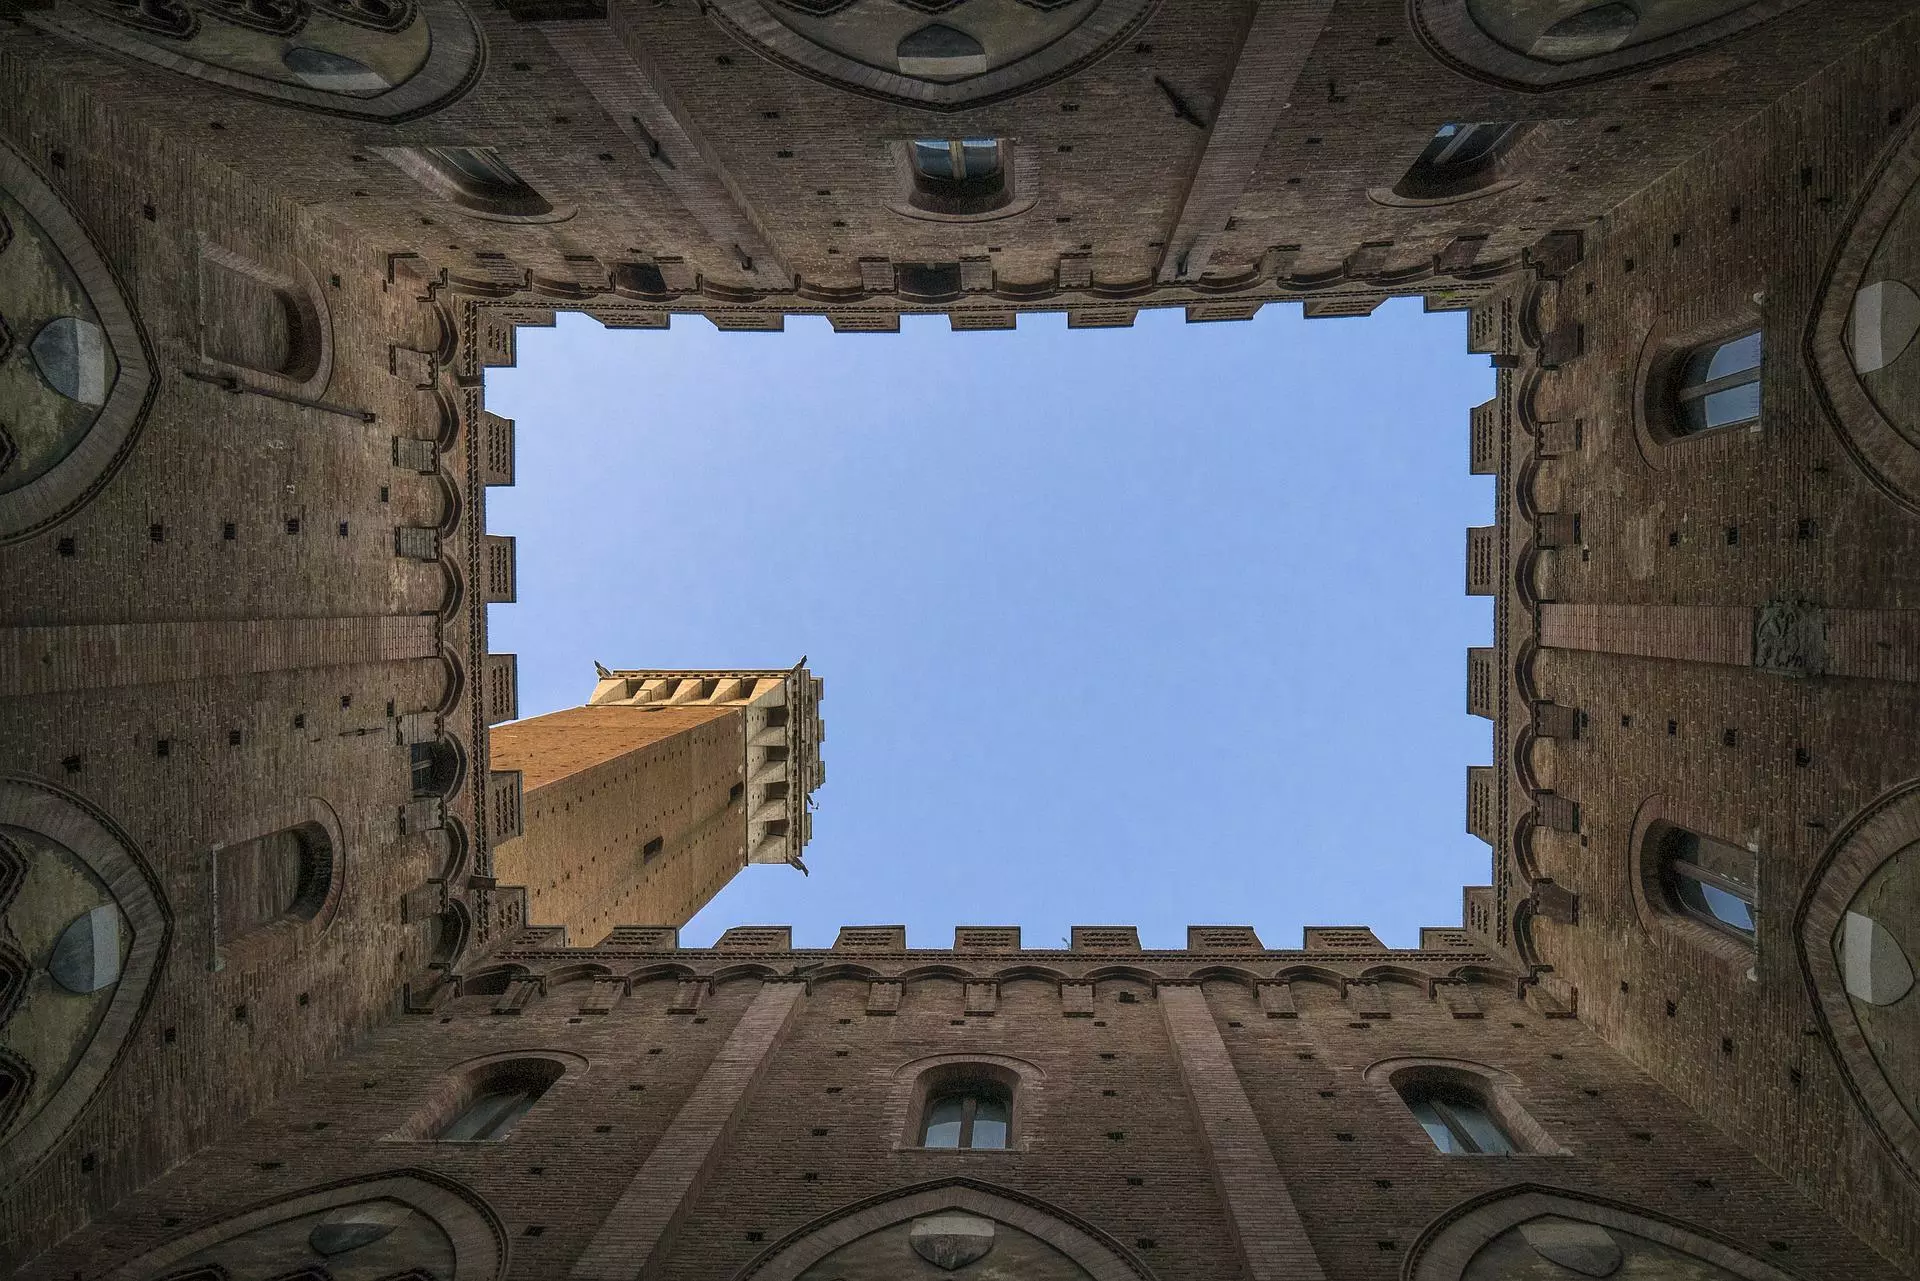 The Sienese arch viewed from below